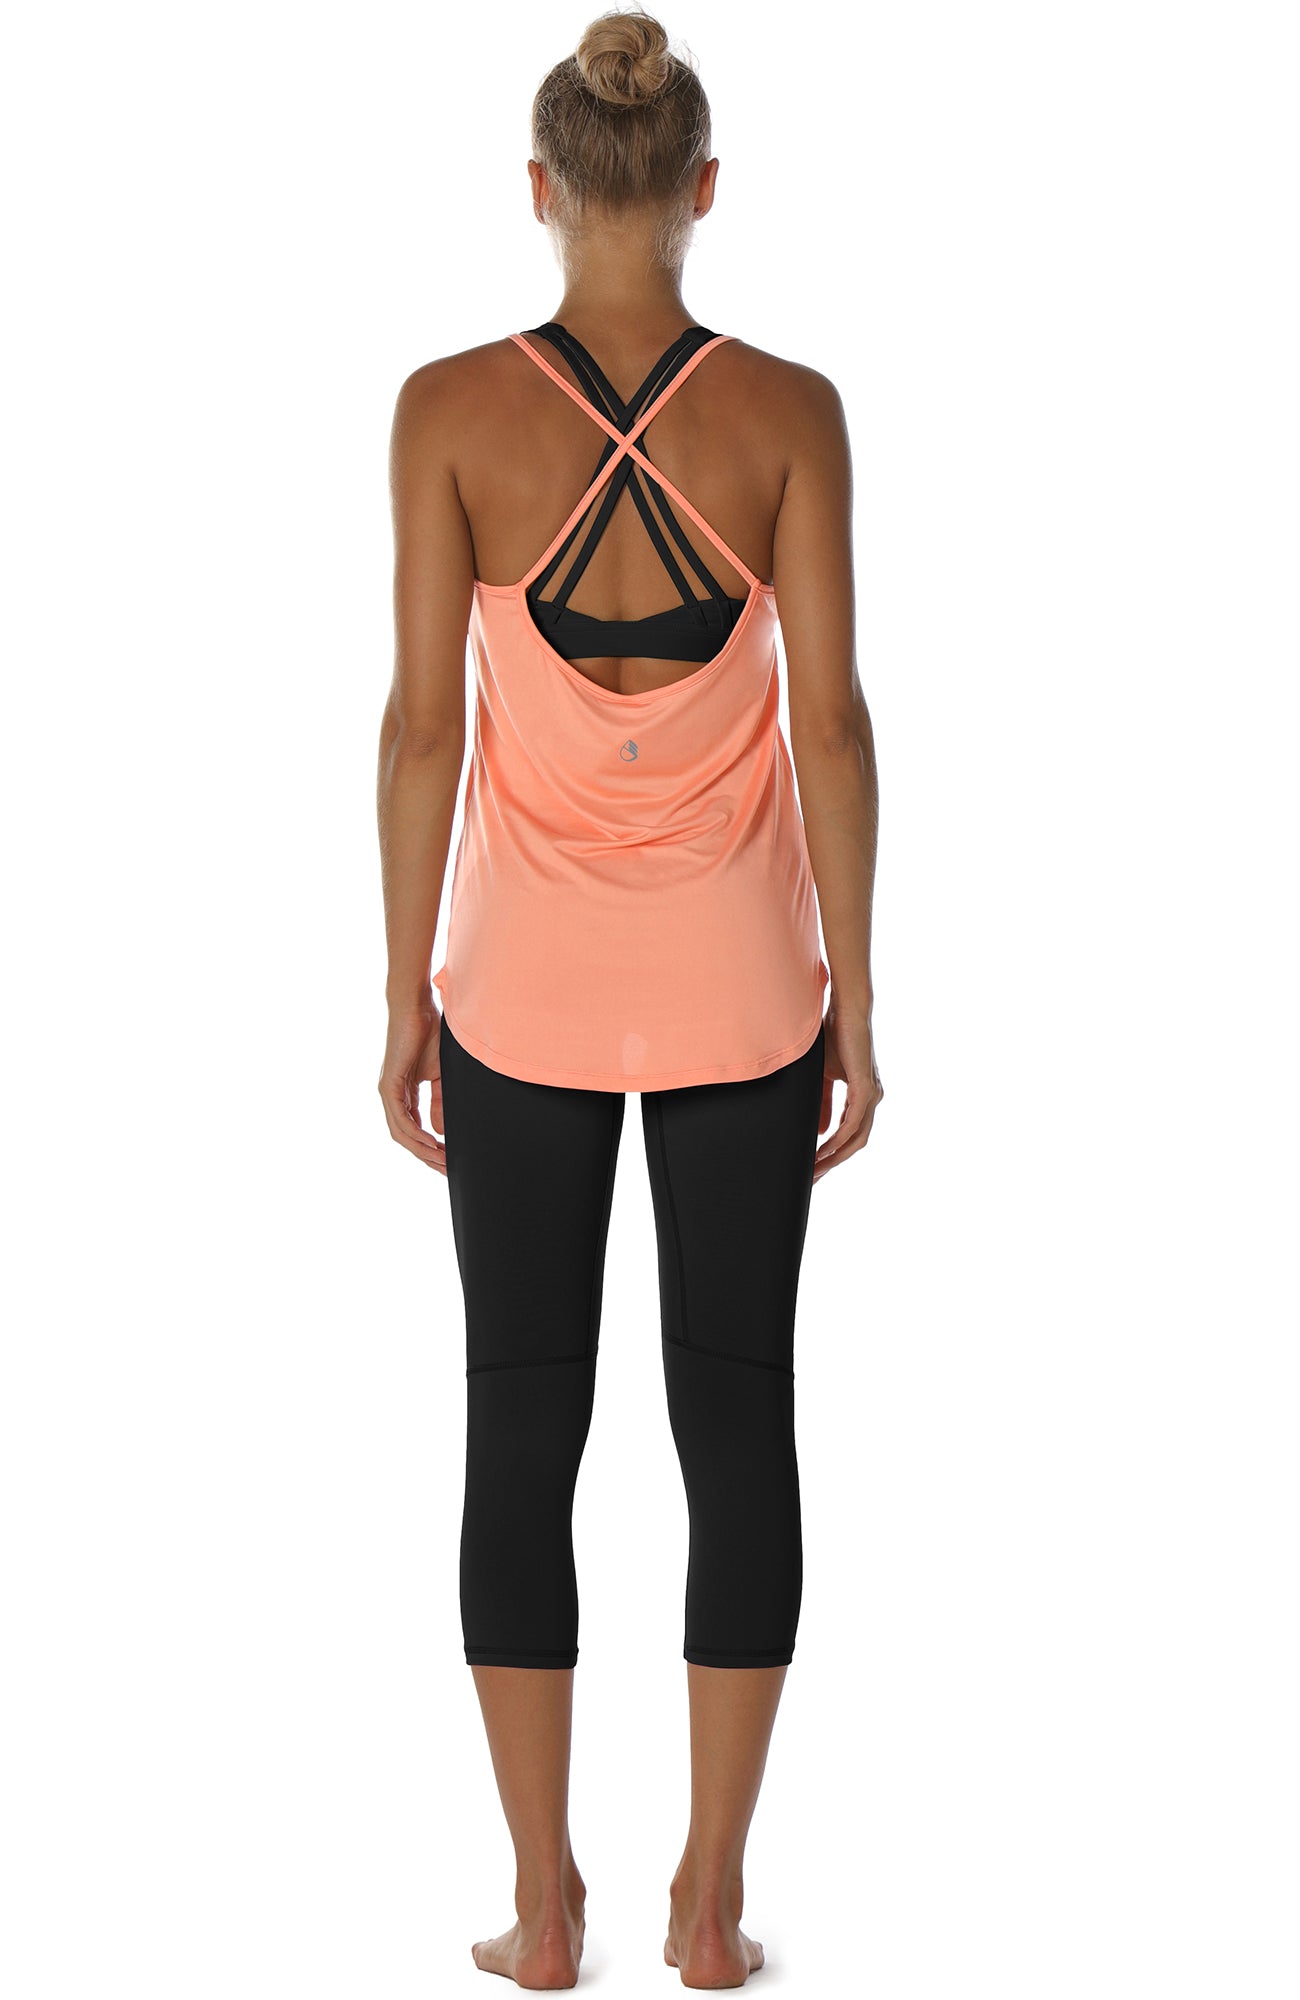 icyzone Workout Tank Tops for Women - Athletic Yoga Tops Open Back Str –  icyzonesports